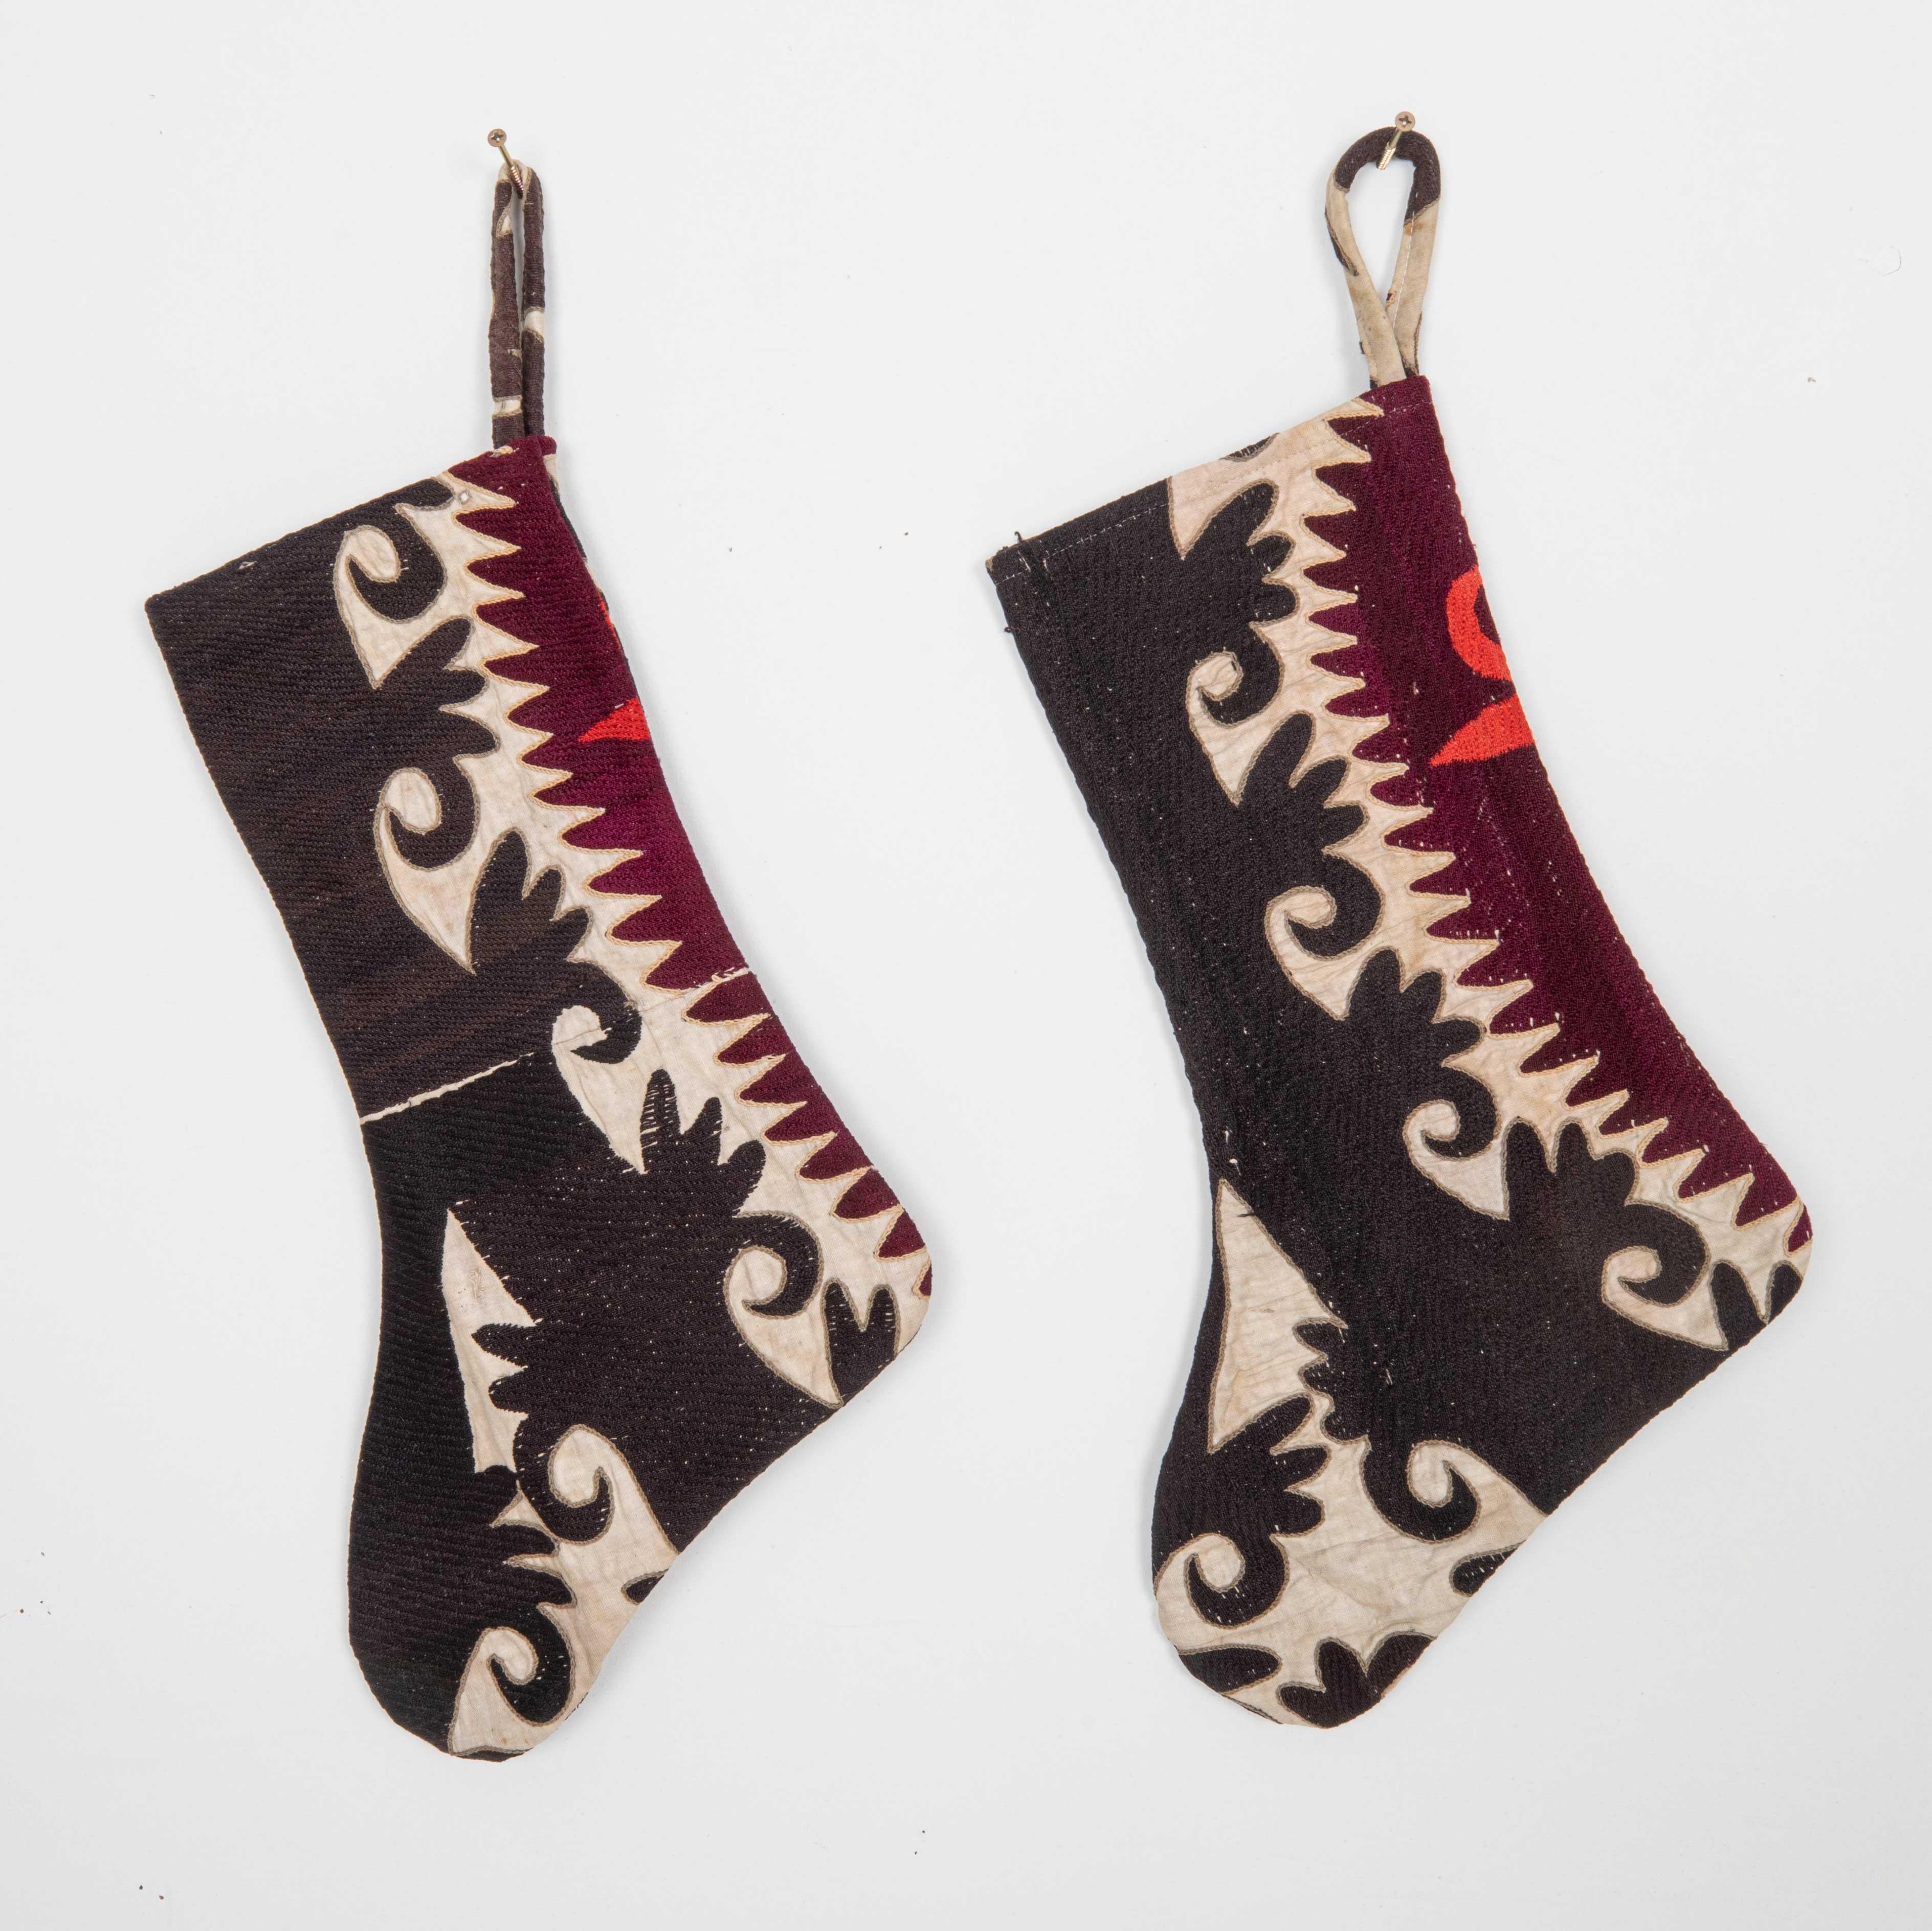 This Christmas Stocking was made from a late 19th or Early 20th C. suzani fragments.
Linen in the back.

Please note, this stocking was made from Vıntage suzani fragments.

